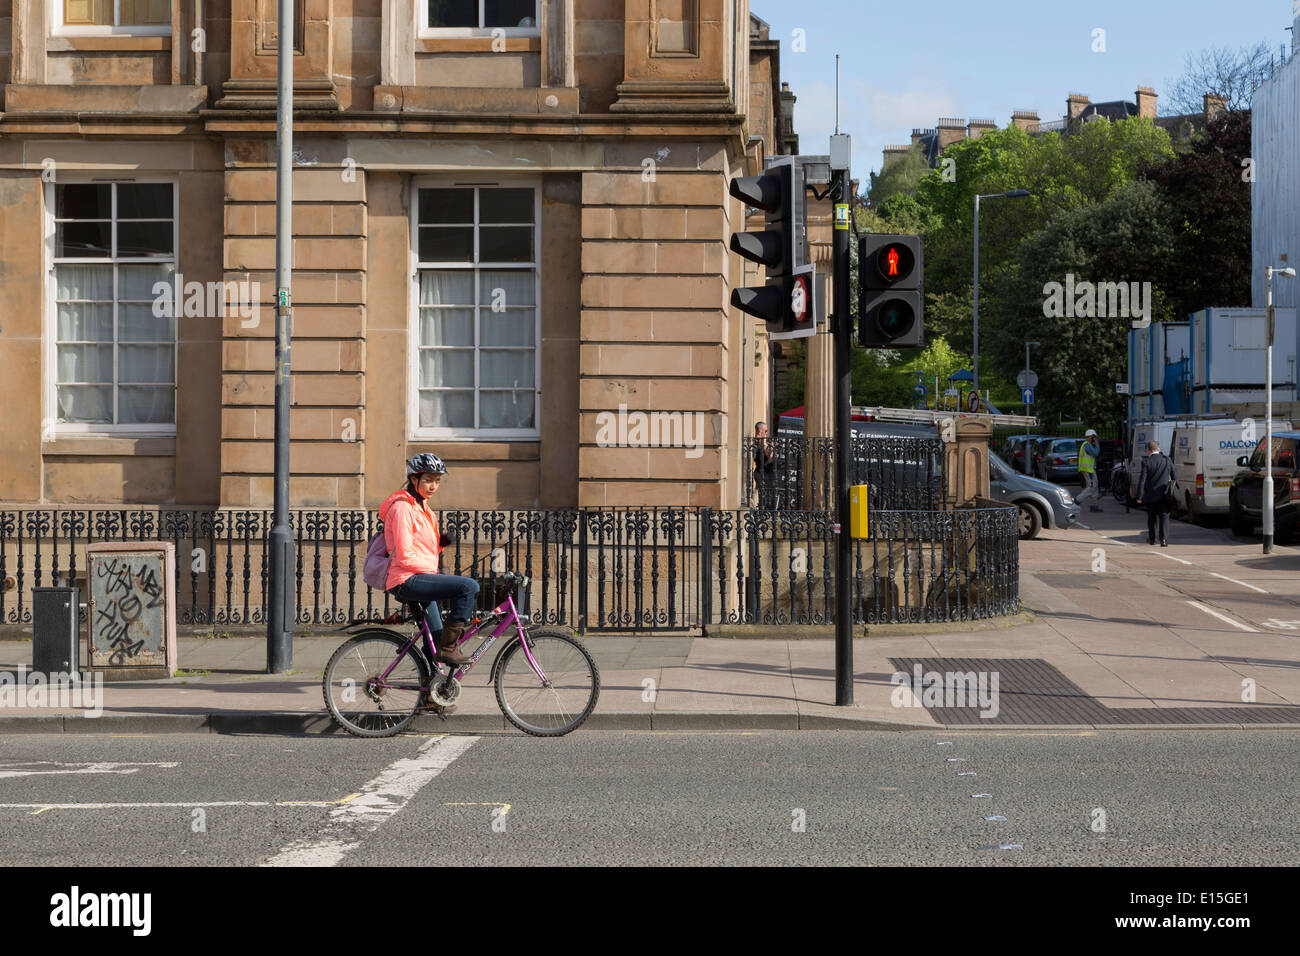 A girl/woman waiting at traffic lights (UK) on a bicycle. Stock Photo